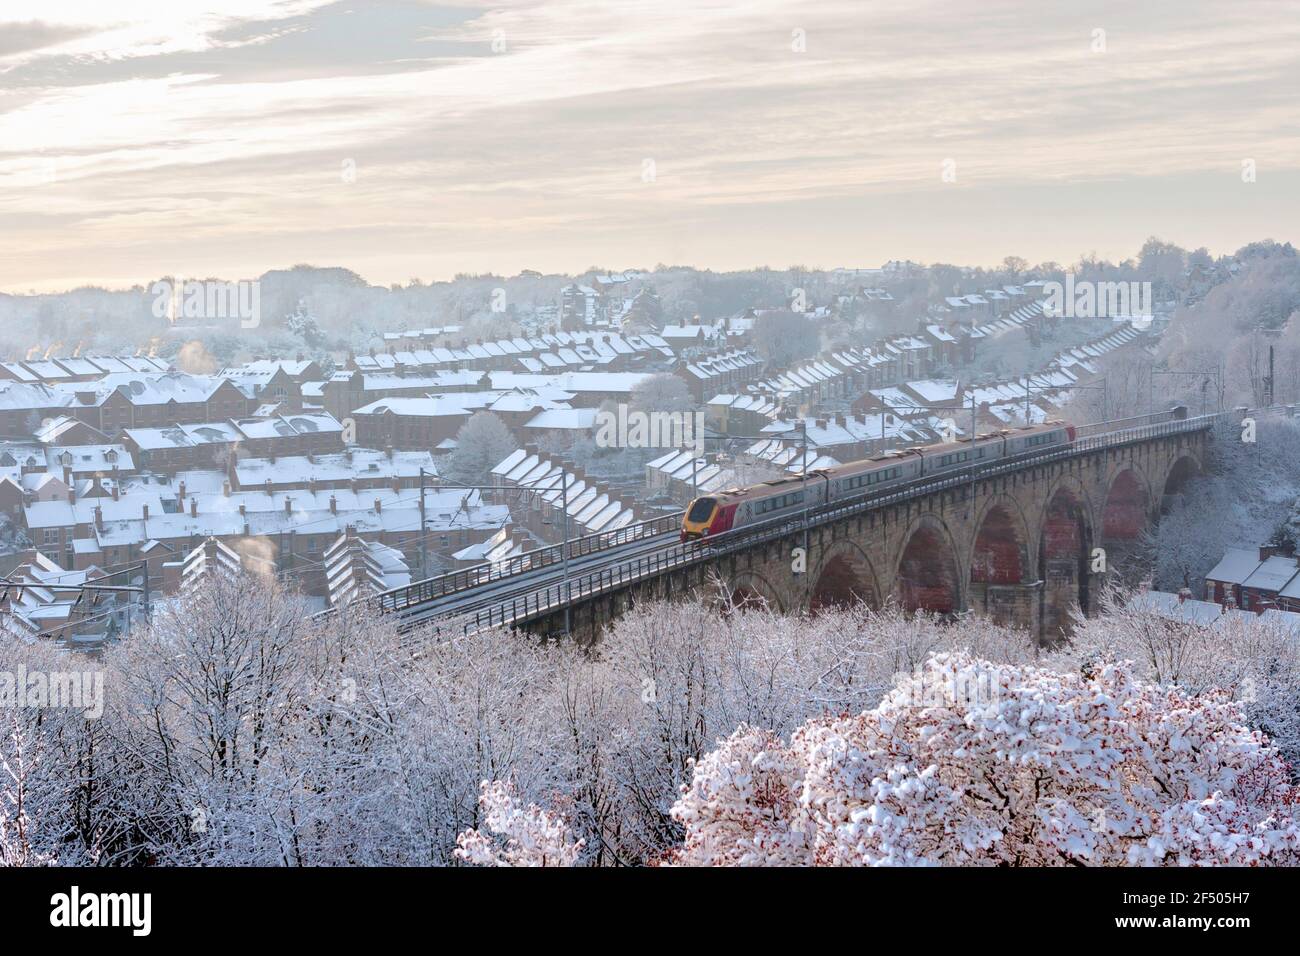 Winter view of a diesel passenger train crossing the railway viaduct at Durham in England, UK December 2005 Stock Photo